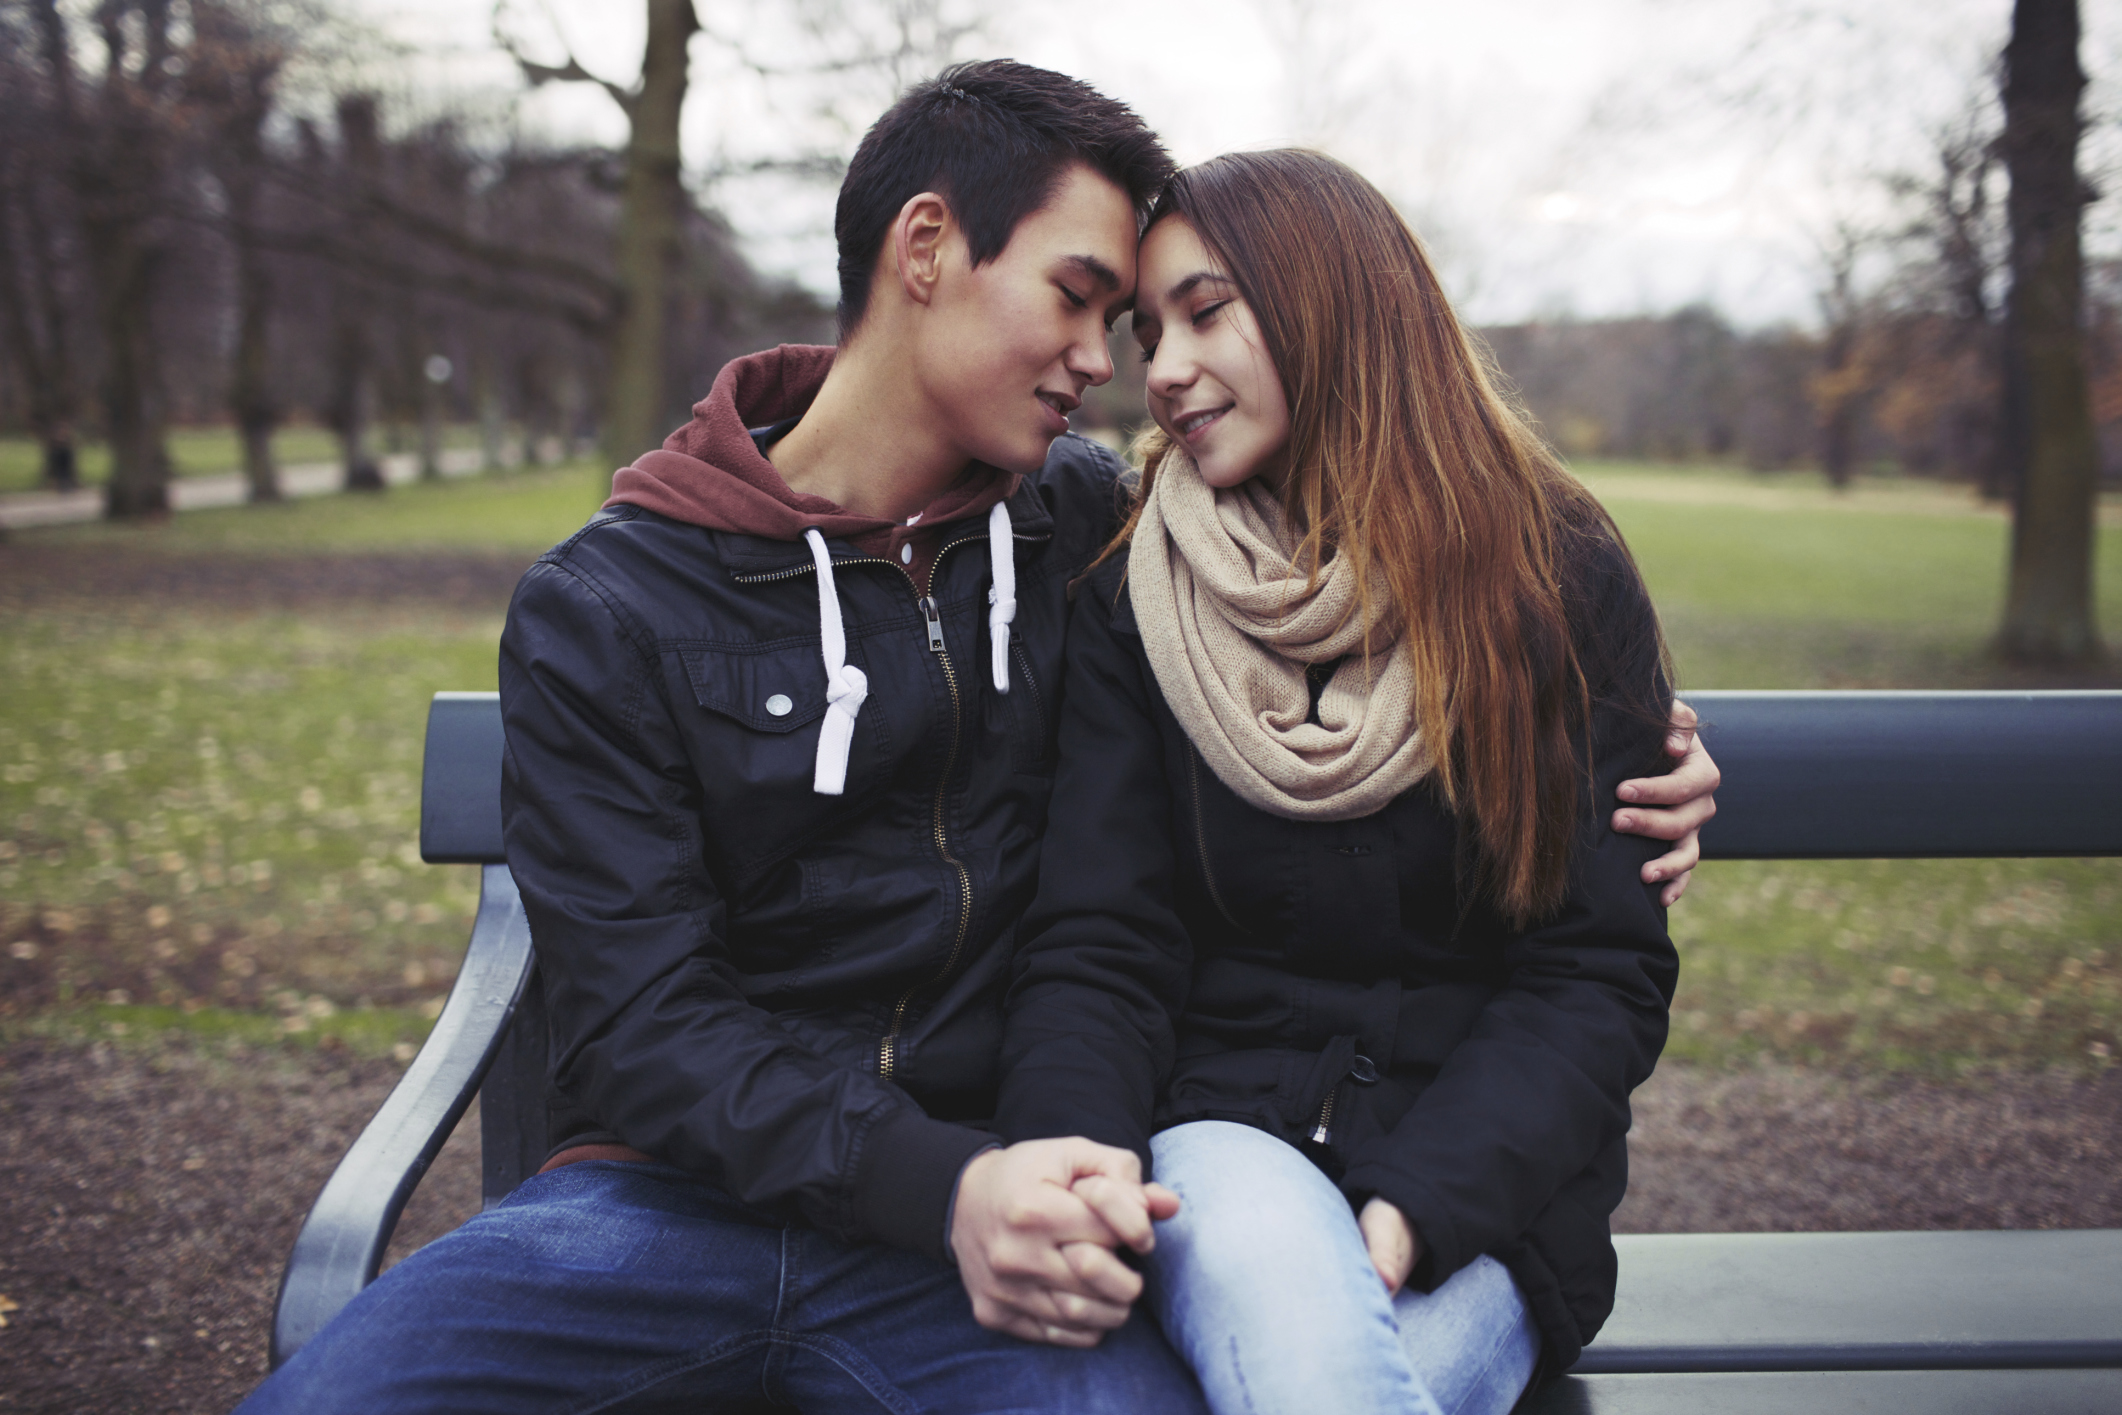 Teen couple holding hands and cuddling on bench